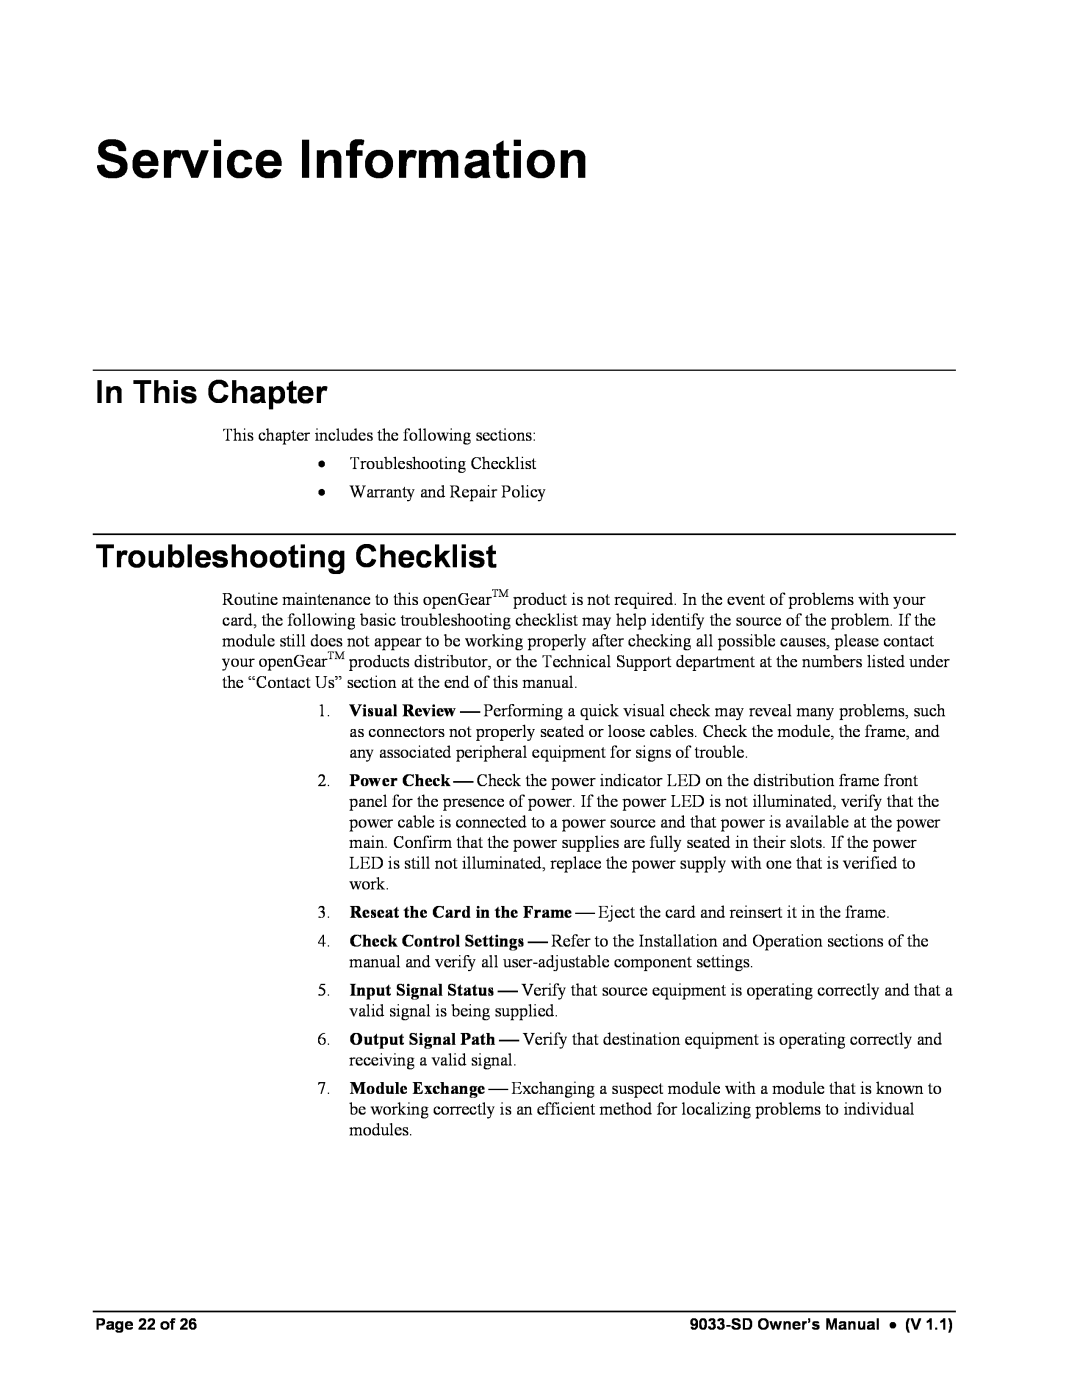 Cobalt Networks 9033-SD owner manual Service Information, Troubleshooting Checklist, In This Chapter 